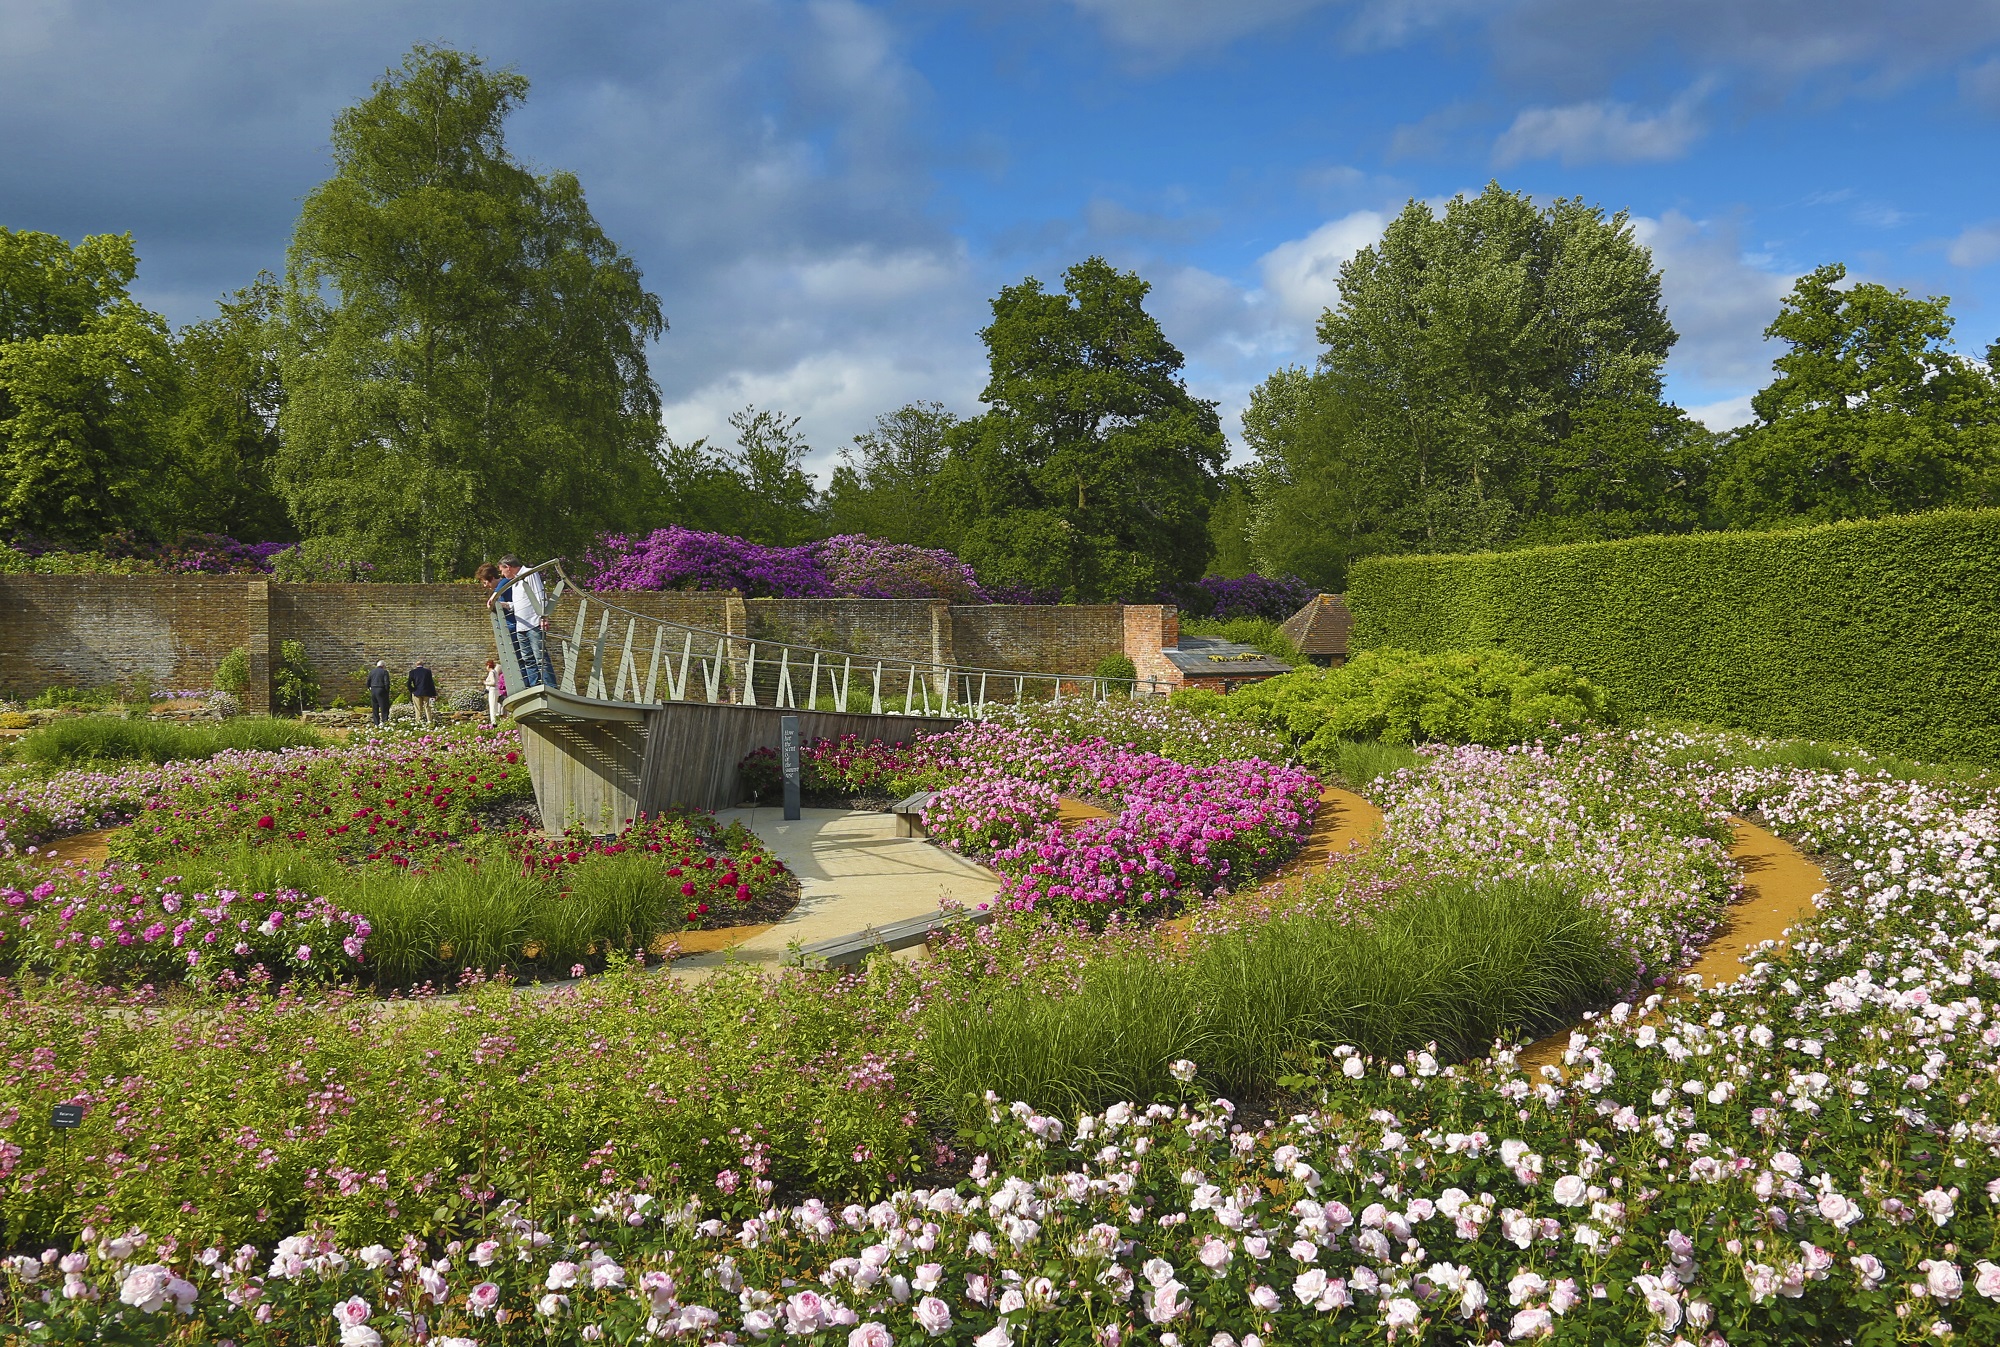 The Savill Garden Rose Garden, Blue, part cloudy sky with colourful roses in bloom.